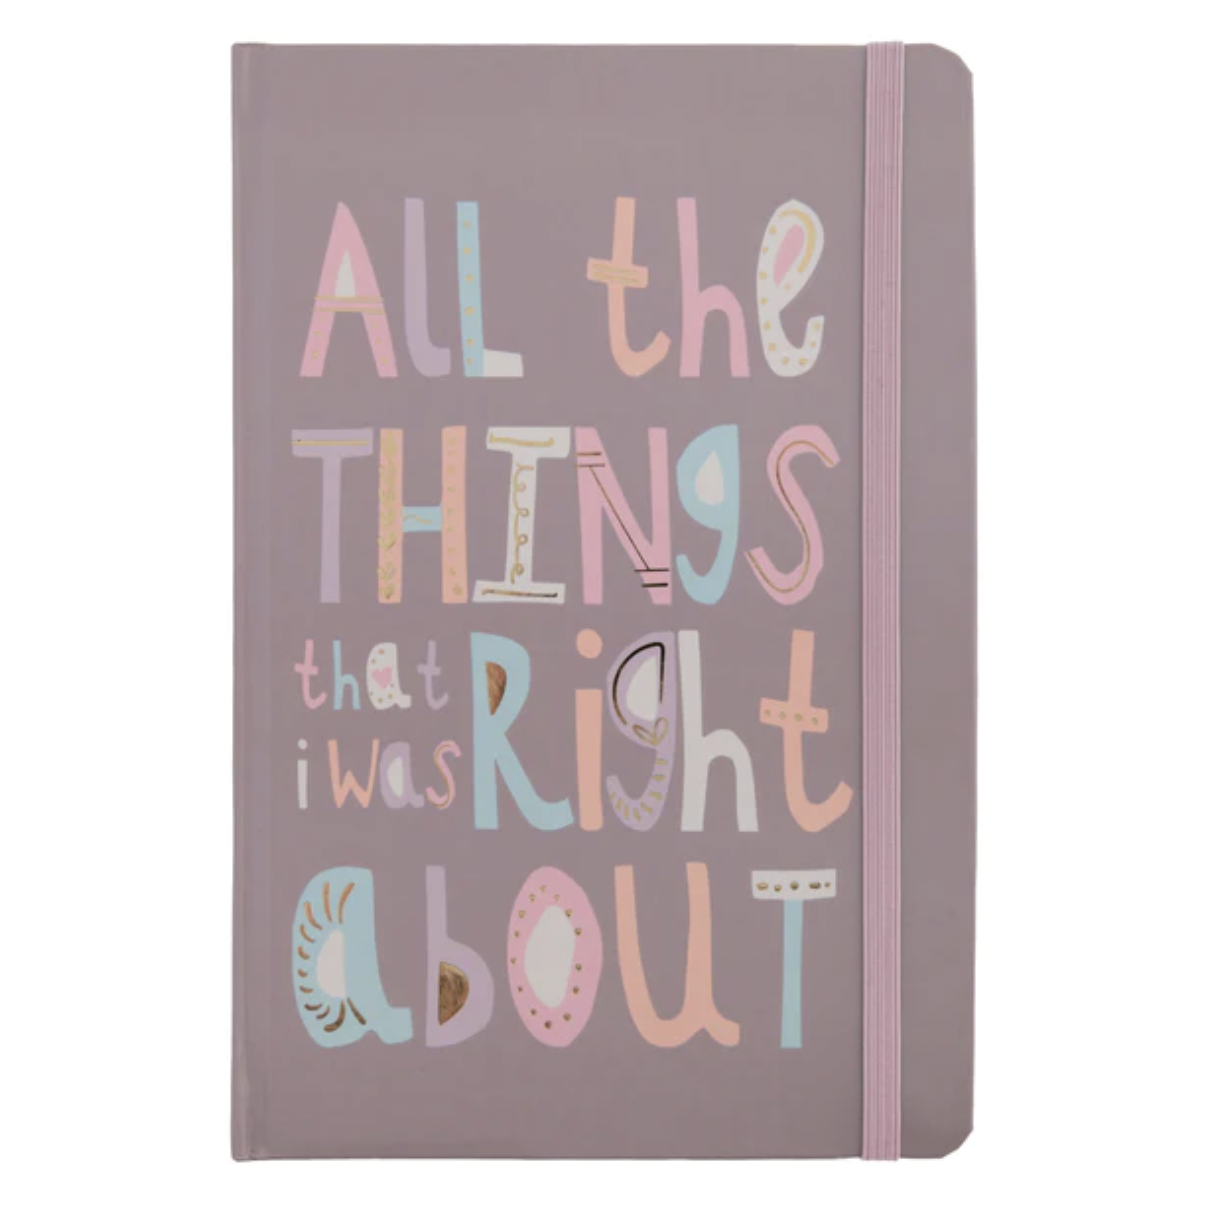 "All The Things That I Was Right About" Journal